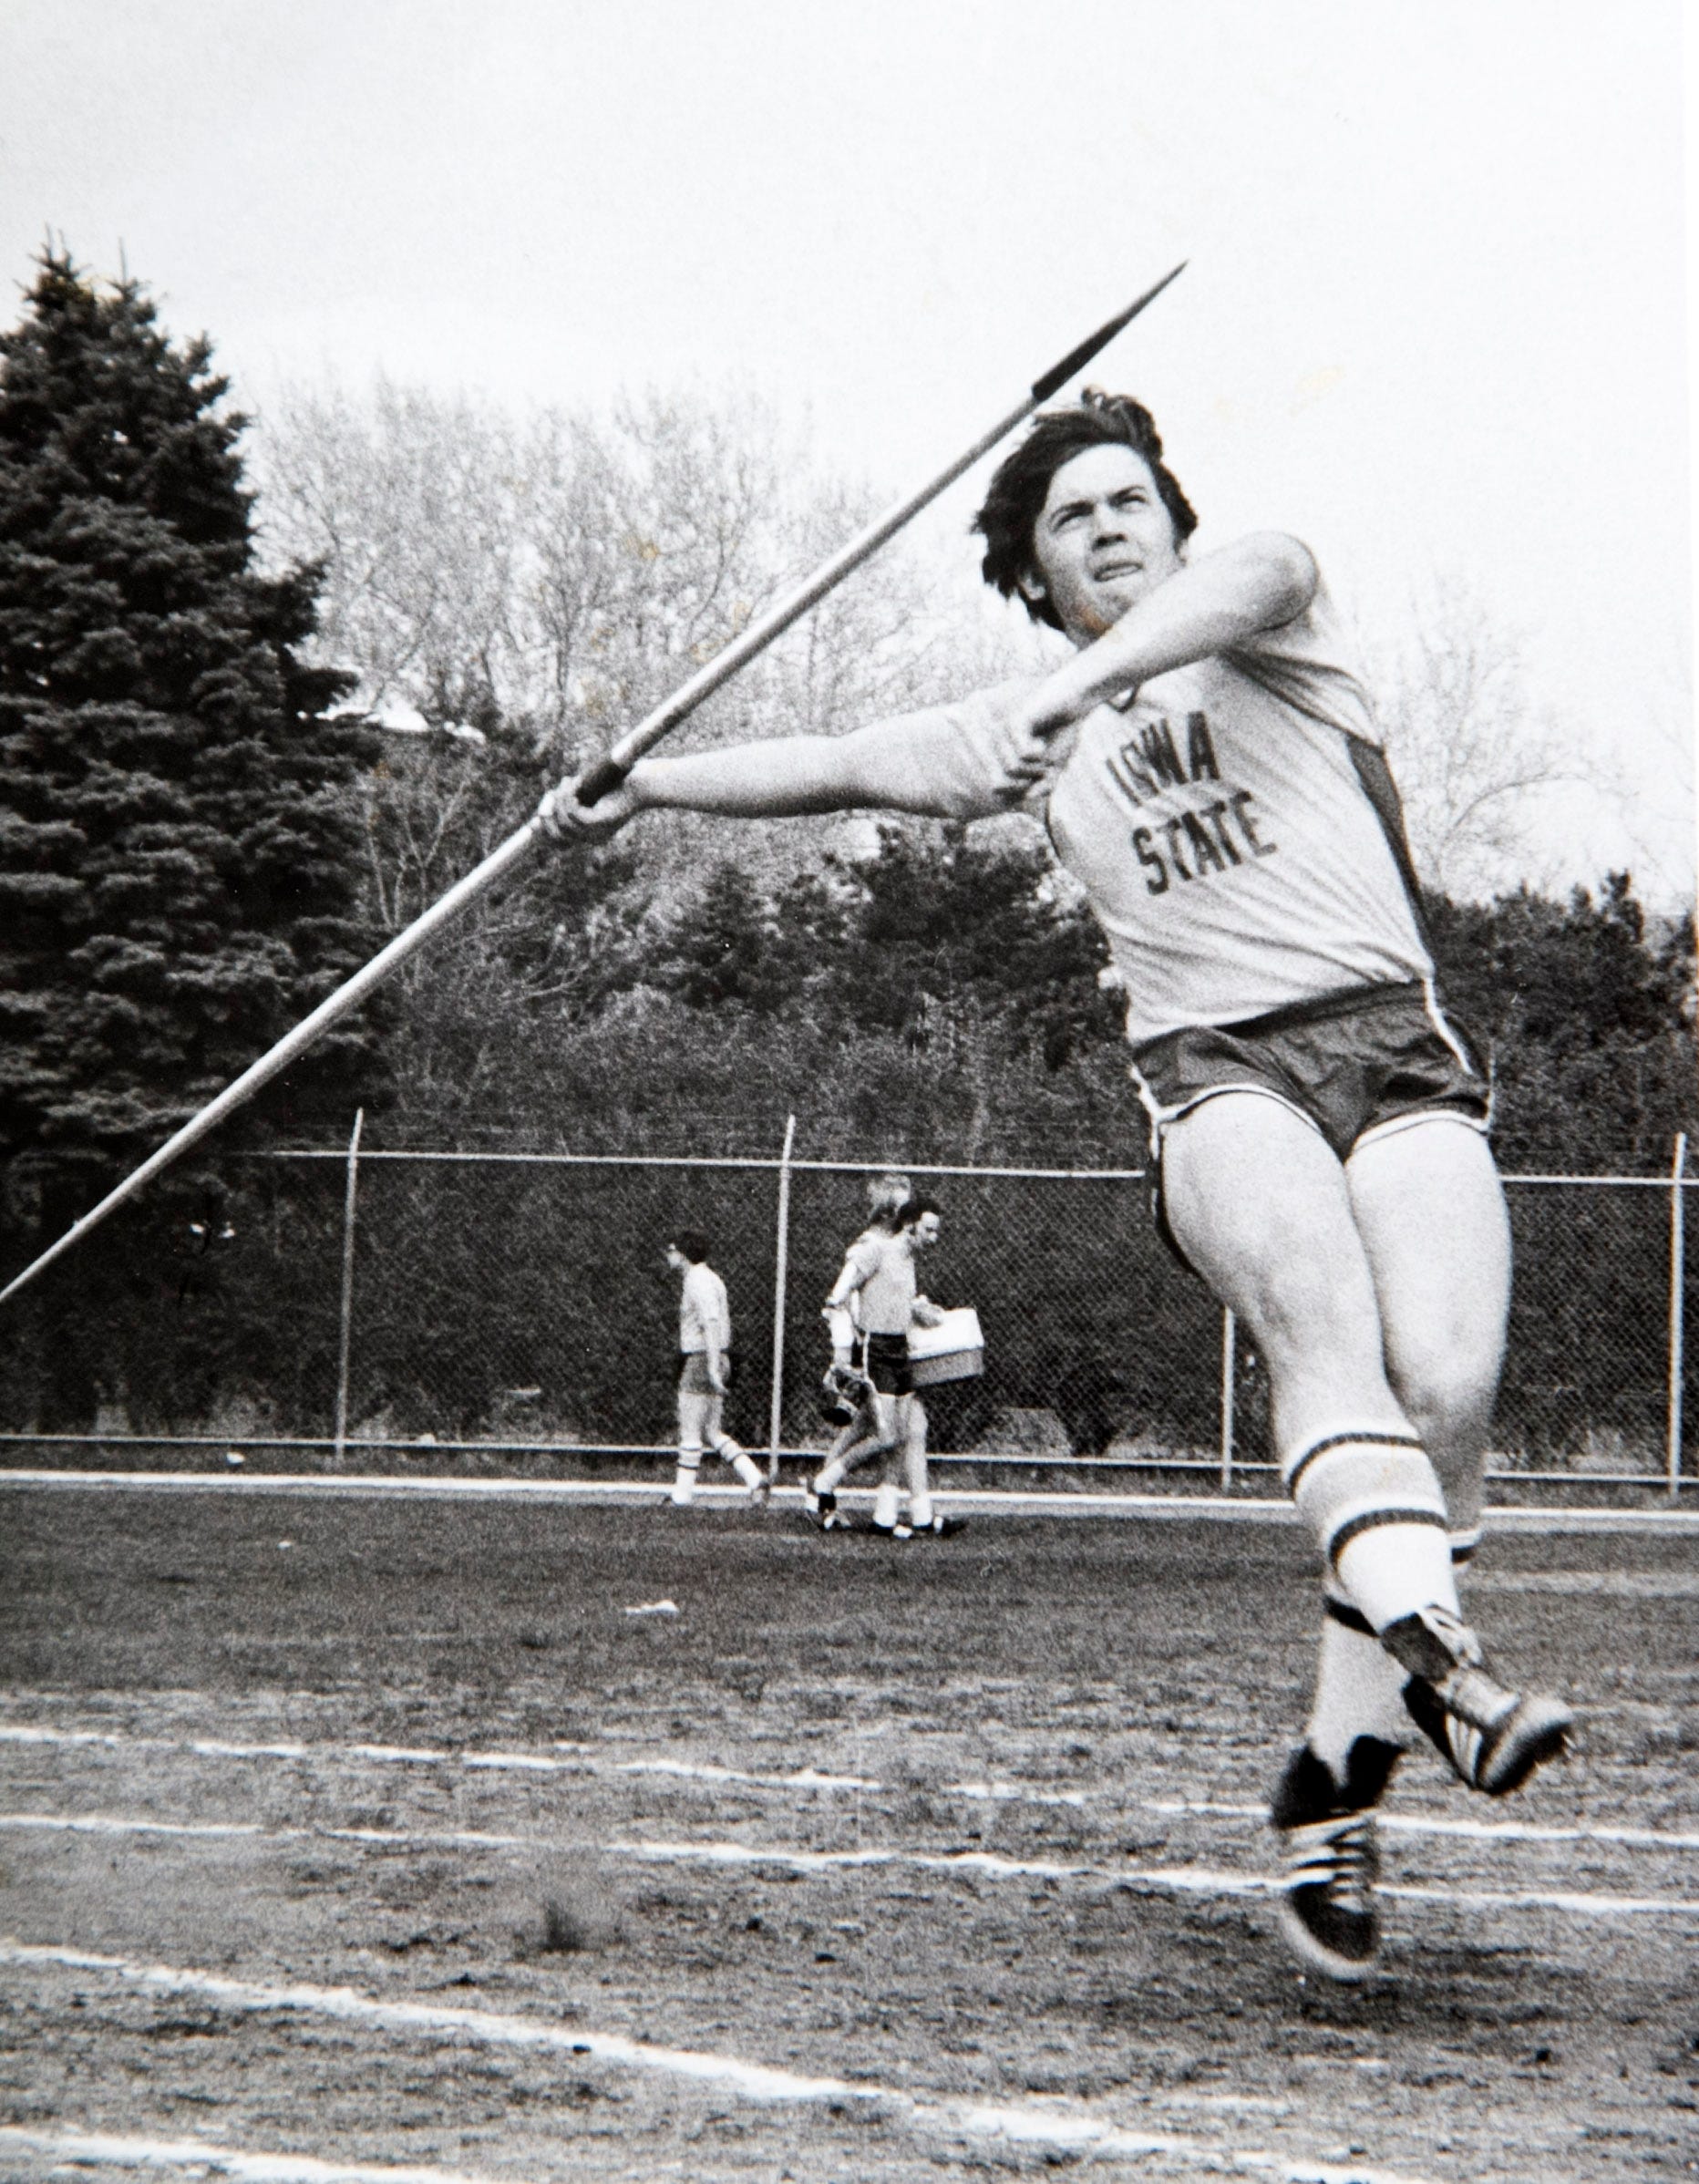 Michael Crow throwing the javelin at Iowa State in Ames, Iowa, in 1976.